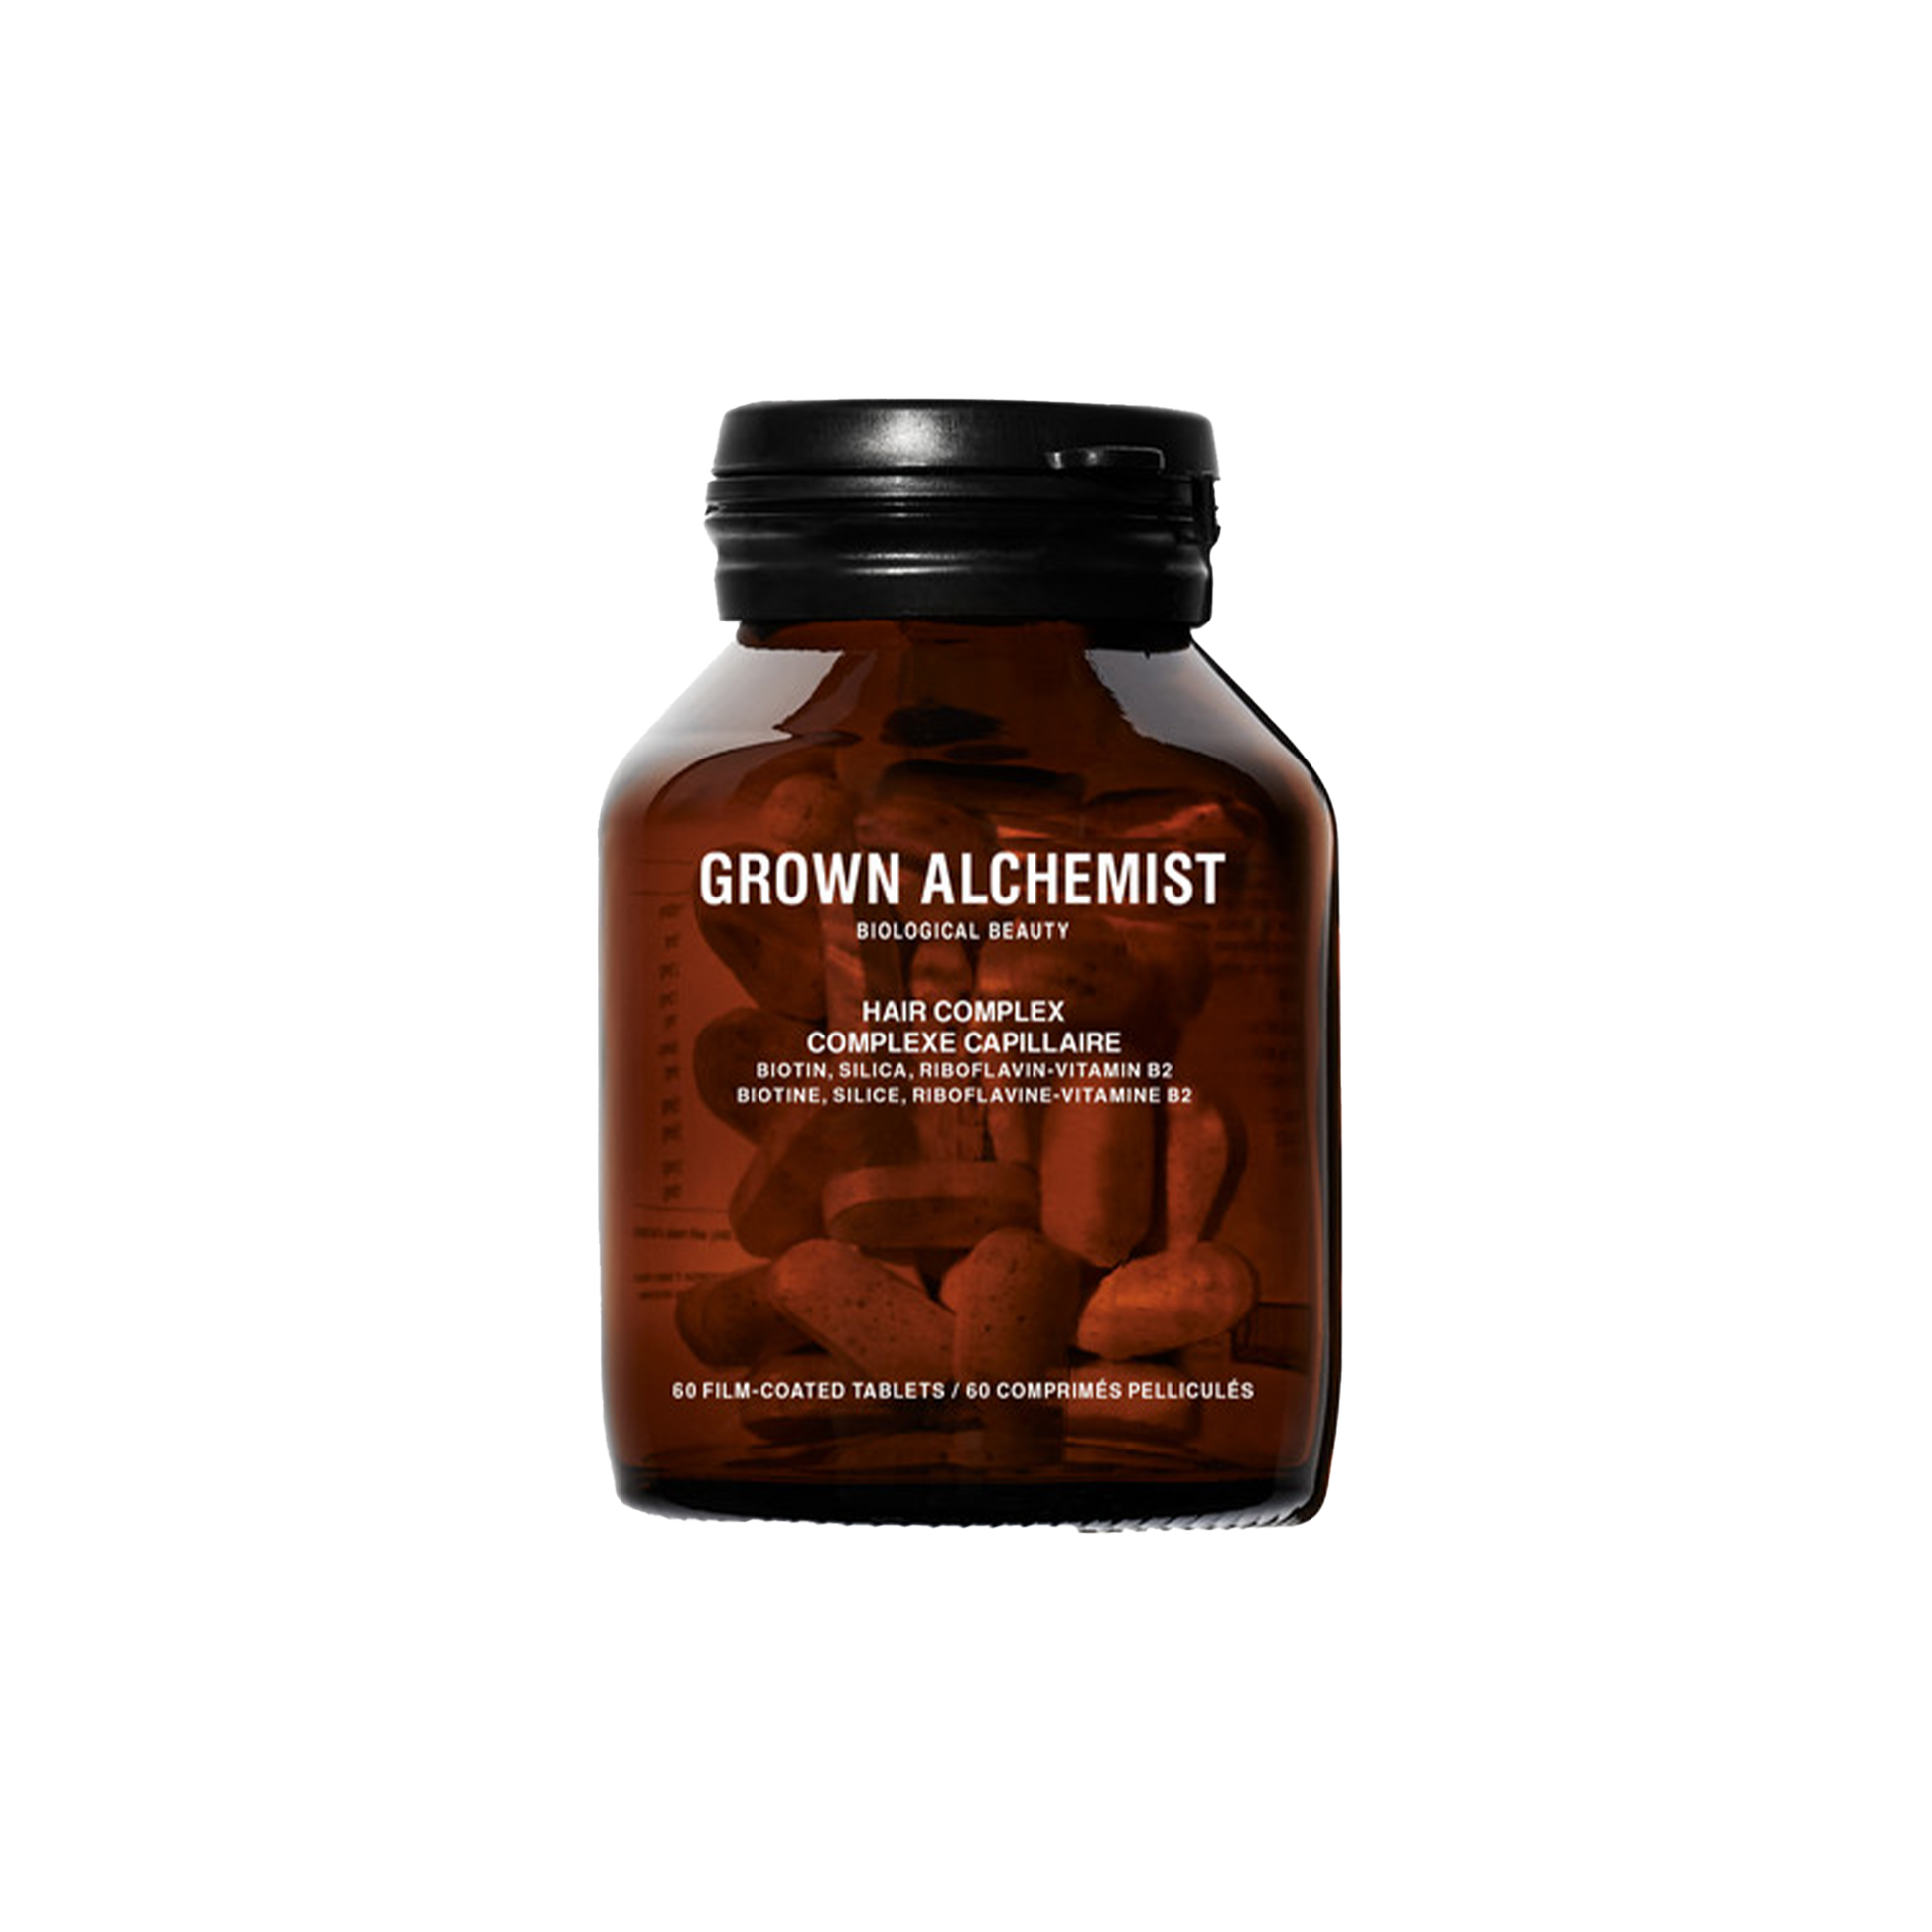 Grown Alchemist Hair Complex: Formulated to support the body’s tissue repair process and provide the building block for healthy hair growth and repair. Bitoin improves your body’s Keratin formation (a protein responsible for hair structure). Silica and Riboflavin are essential for tissue repair and regeneration, resulting in healthier hair growth.